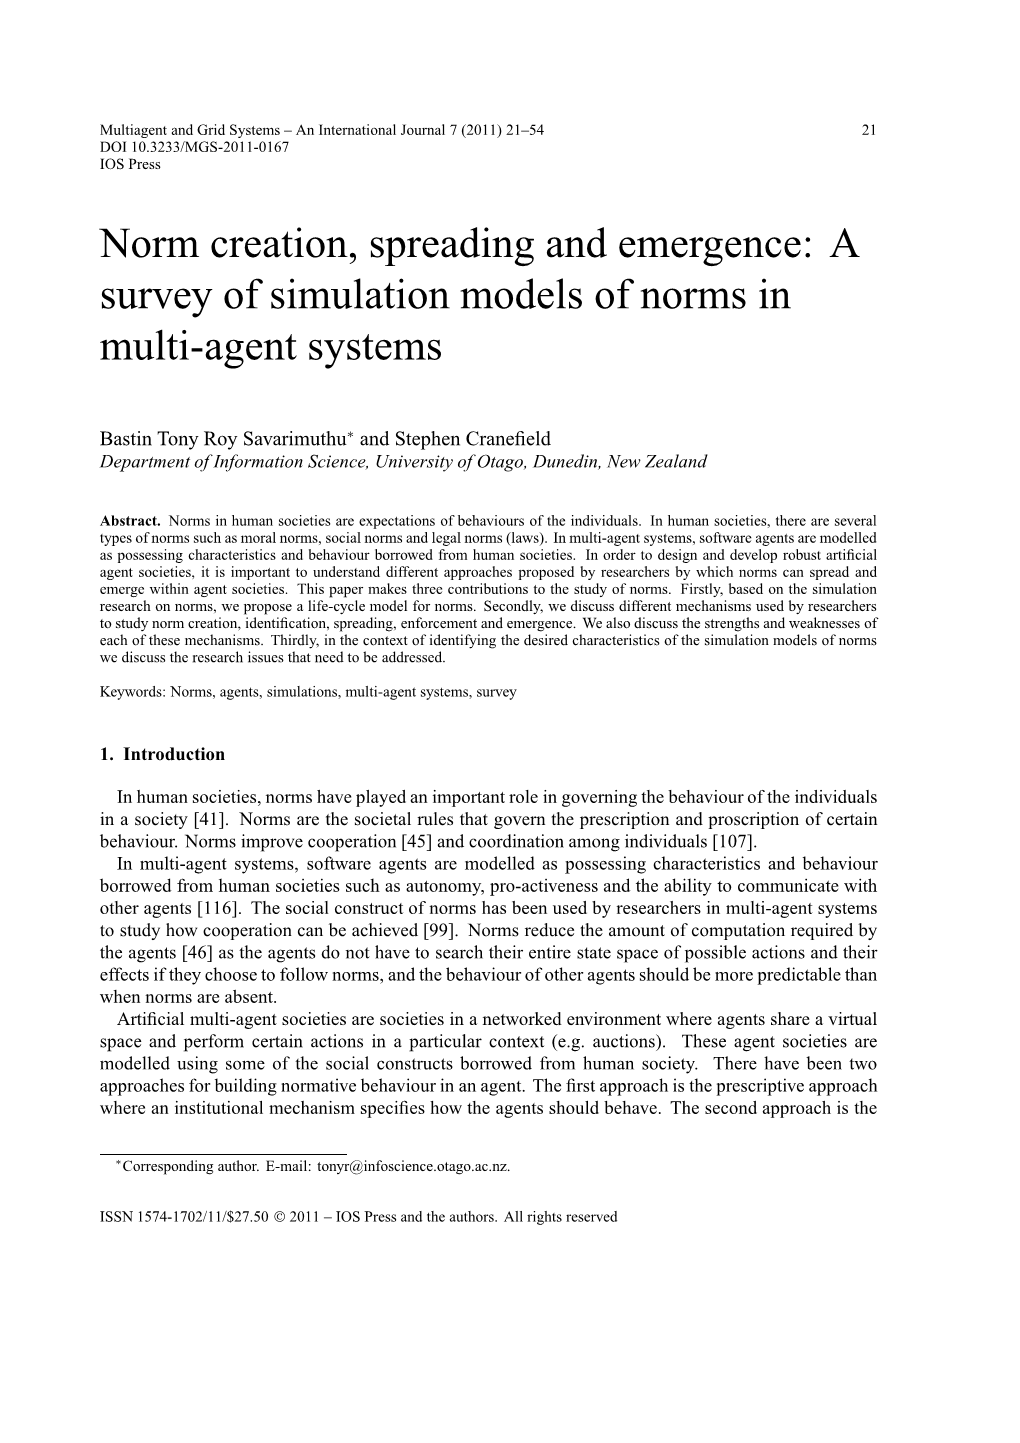 Norm Creation, Spreading and Emergence: a Survey of Simulation Models of Norms in Multi-Agent Systems